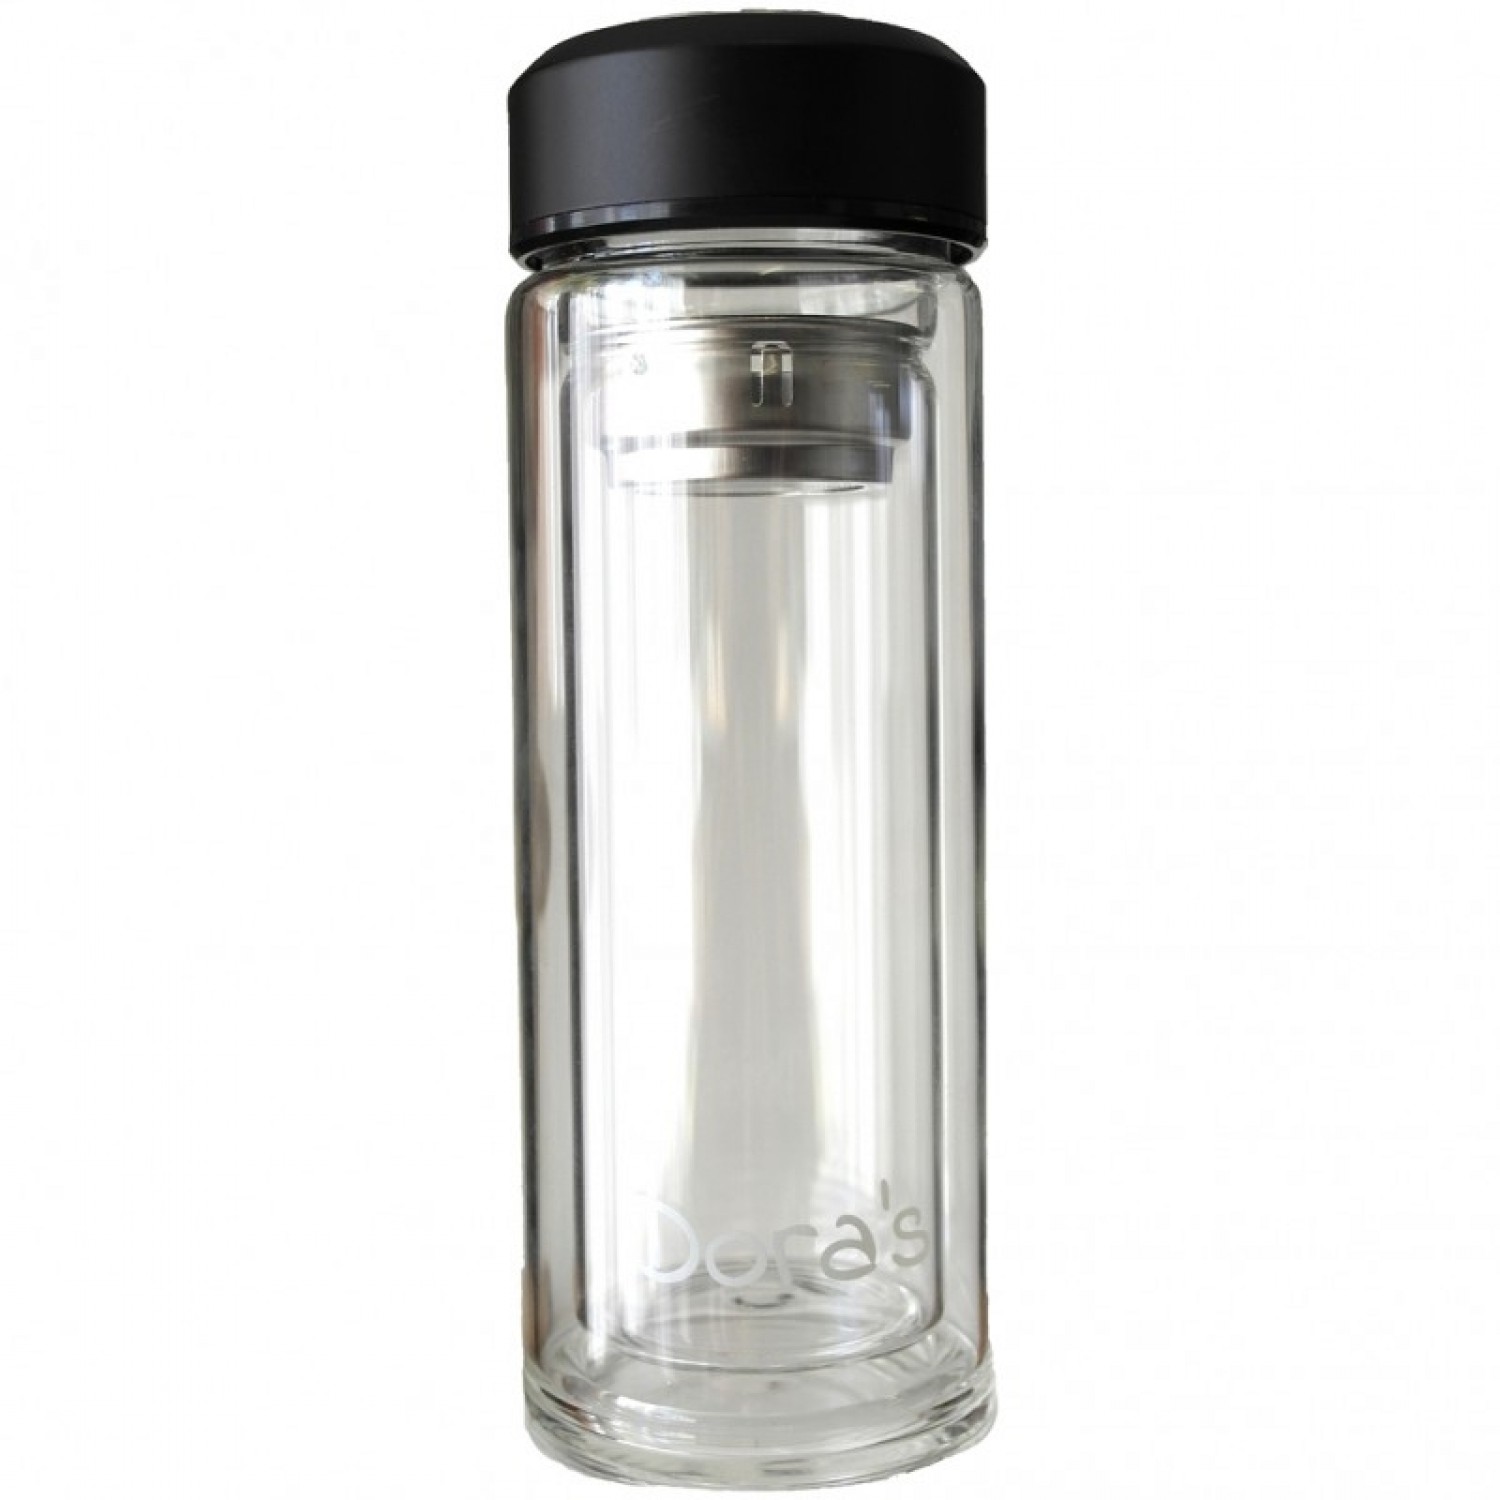 Dora's Thermoflask made of double-walled glass for to go